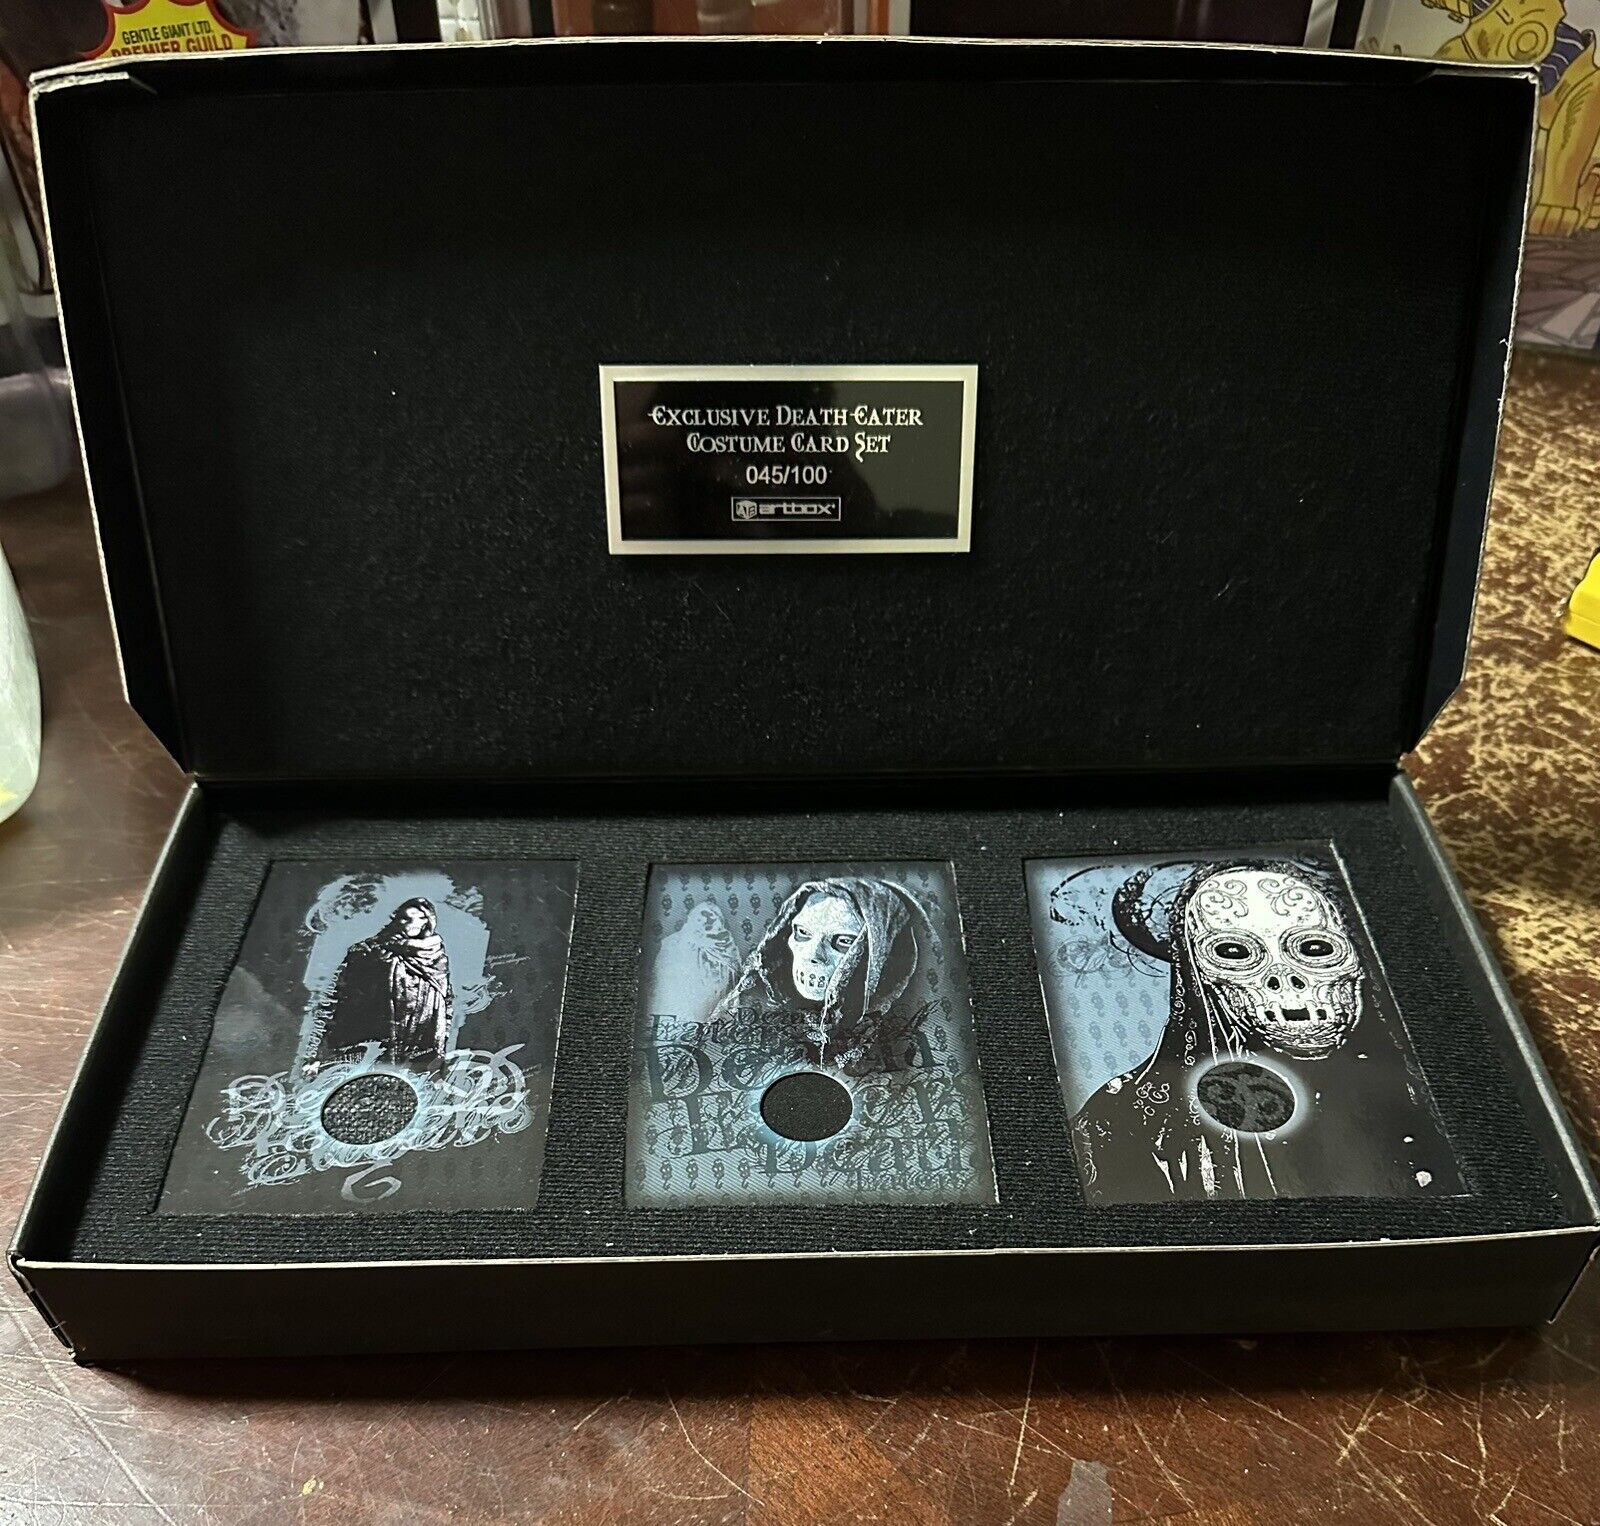 2007 SDCC Exclusive Artbox Harry Potter OOTP Death Eater Costume Card Set 45/100